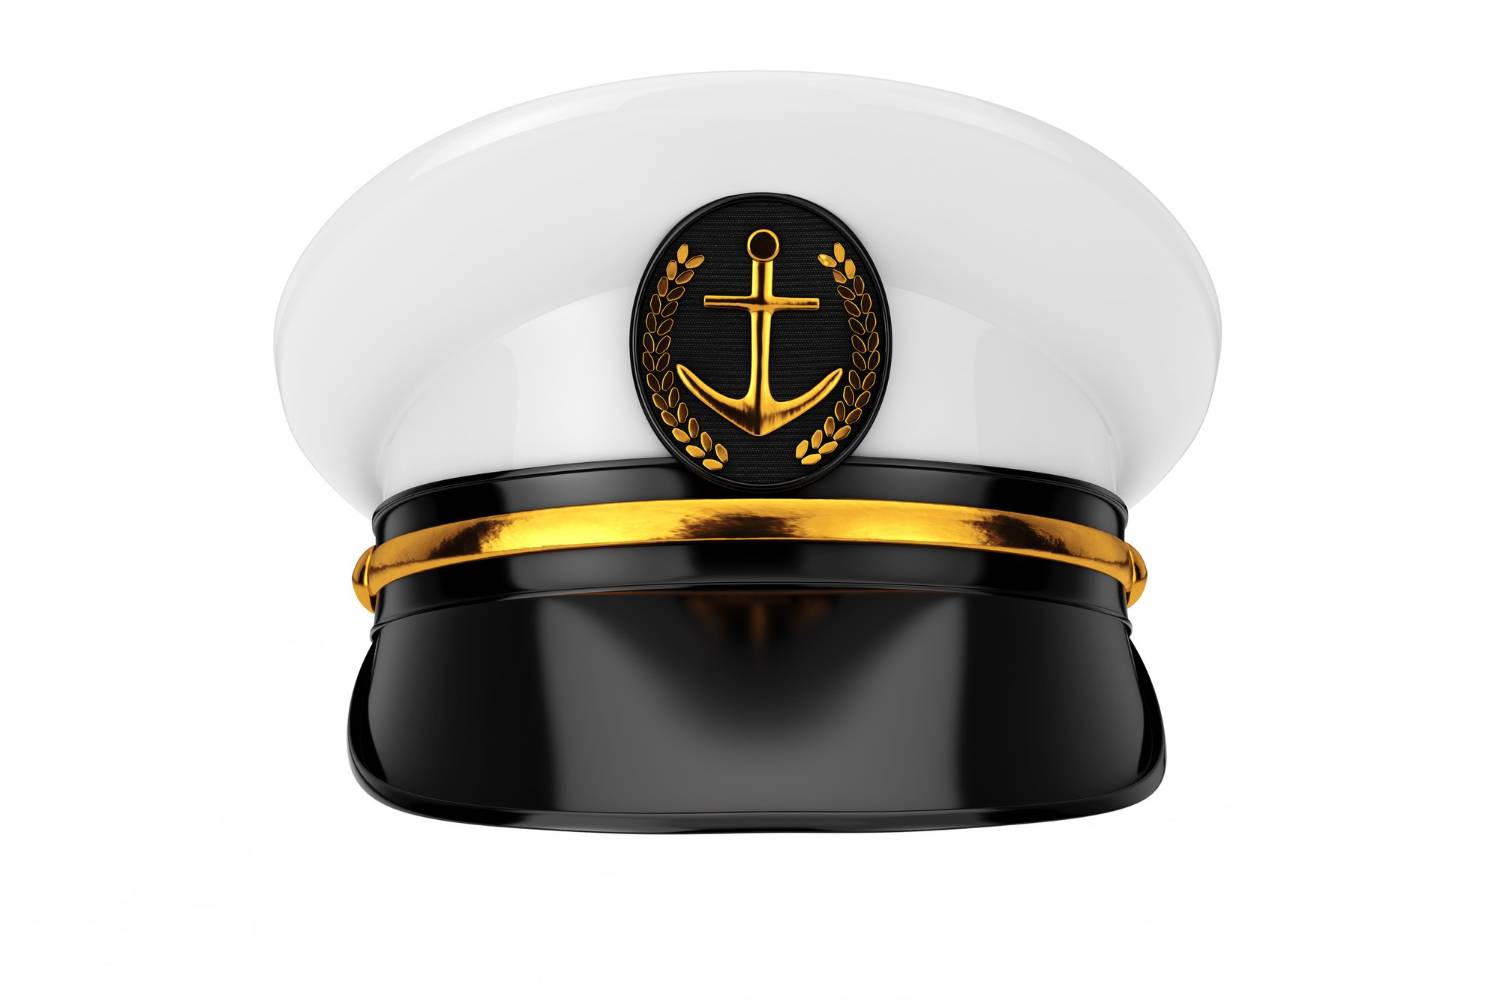 A captain's hat with a gold anchor emblem, symbolizing leadership and adventure. Be your own captain and navigate your journey confidently.